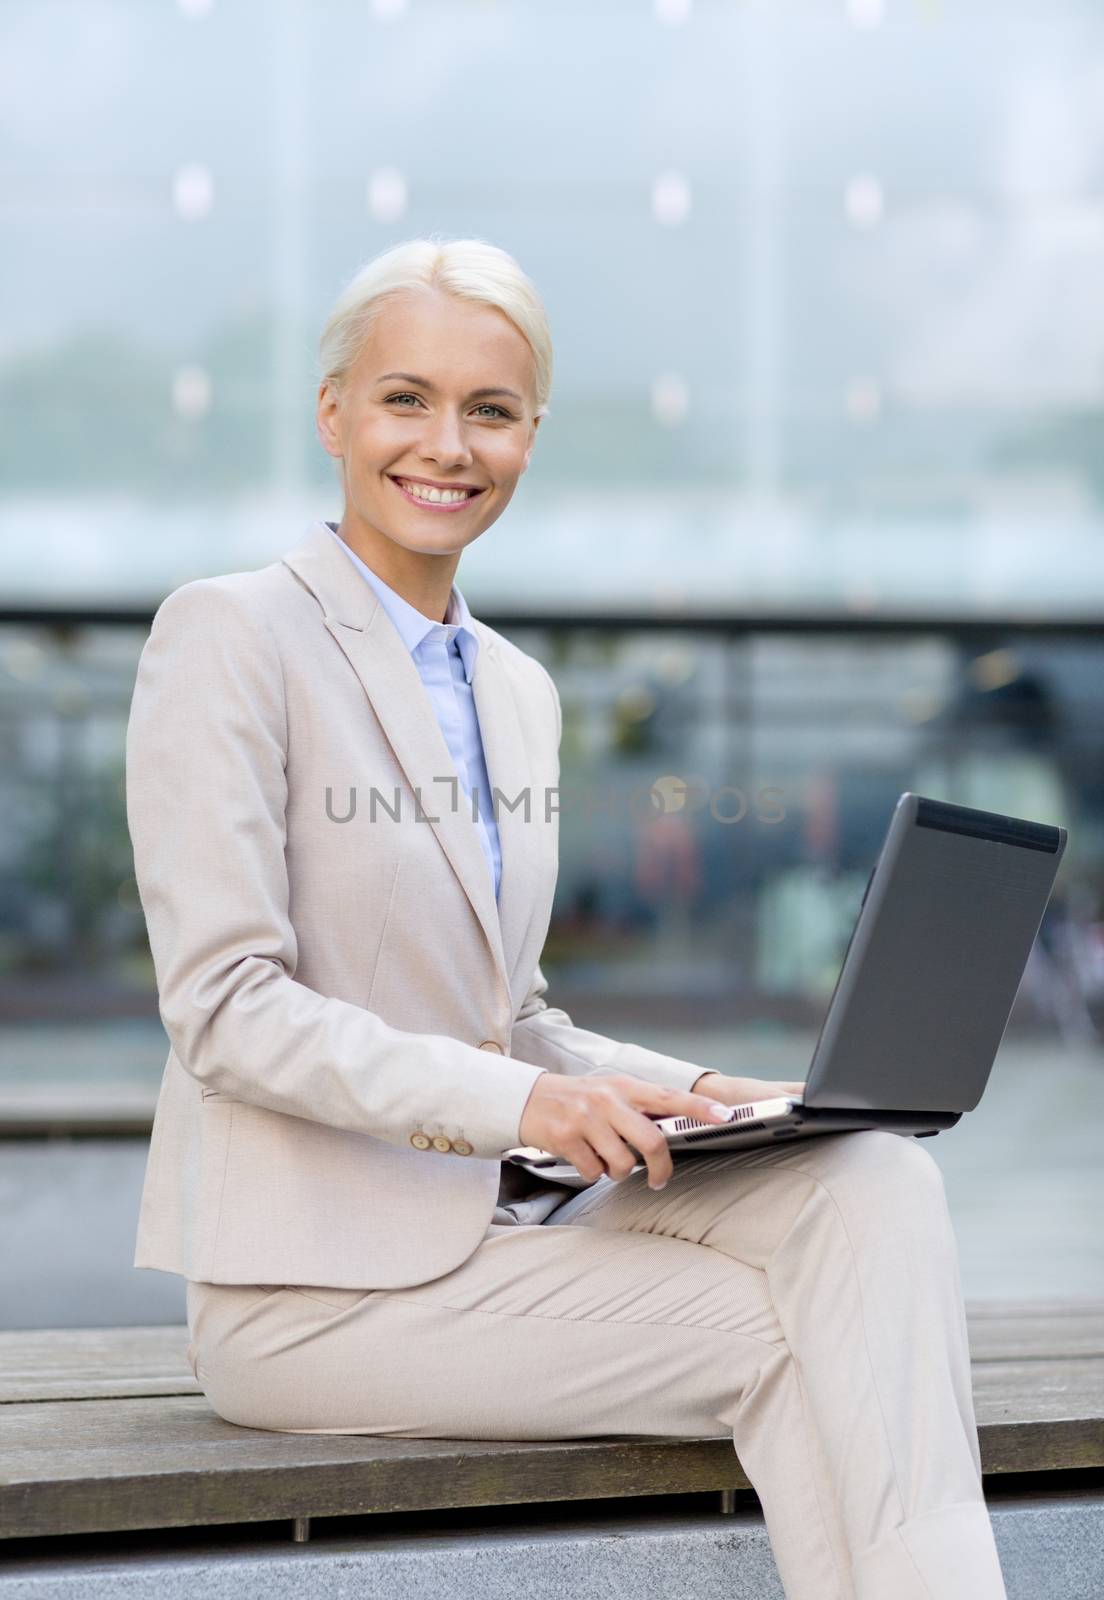 smiling businesswoman working with laptop outdoors by dolgachov